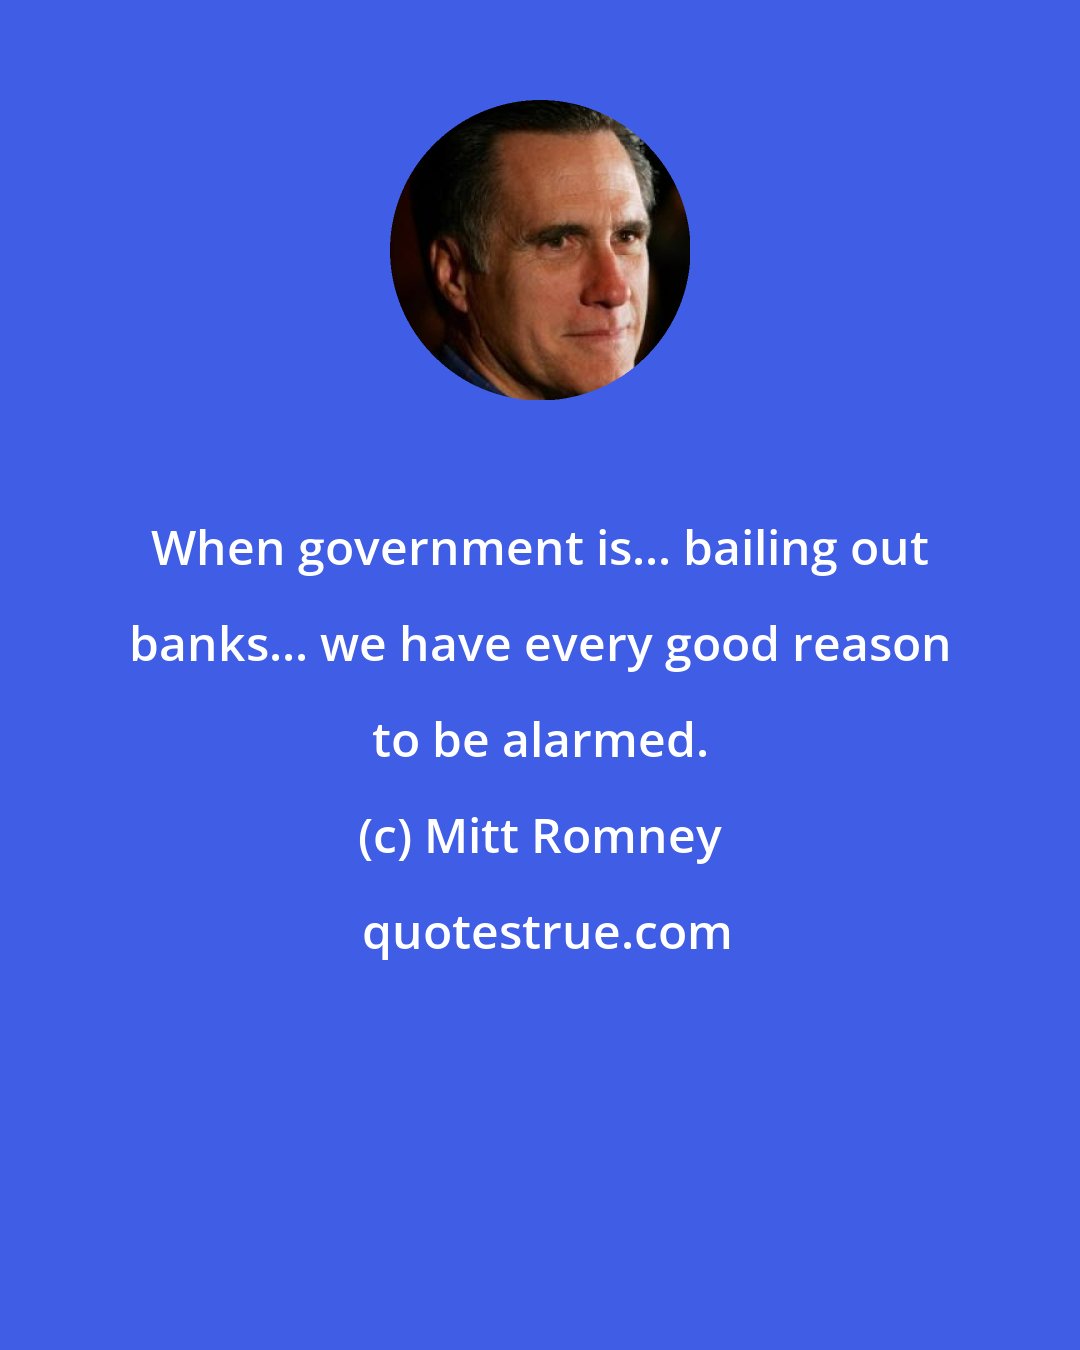 Mitt Romney: When government is... bailing out banks... we have every good reason to be alarmed.